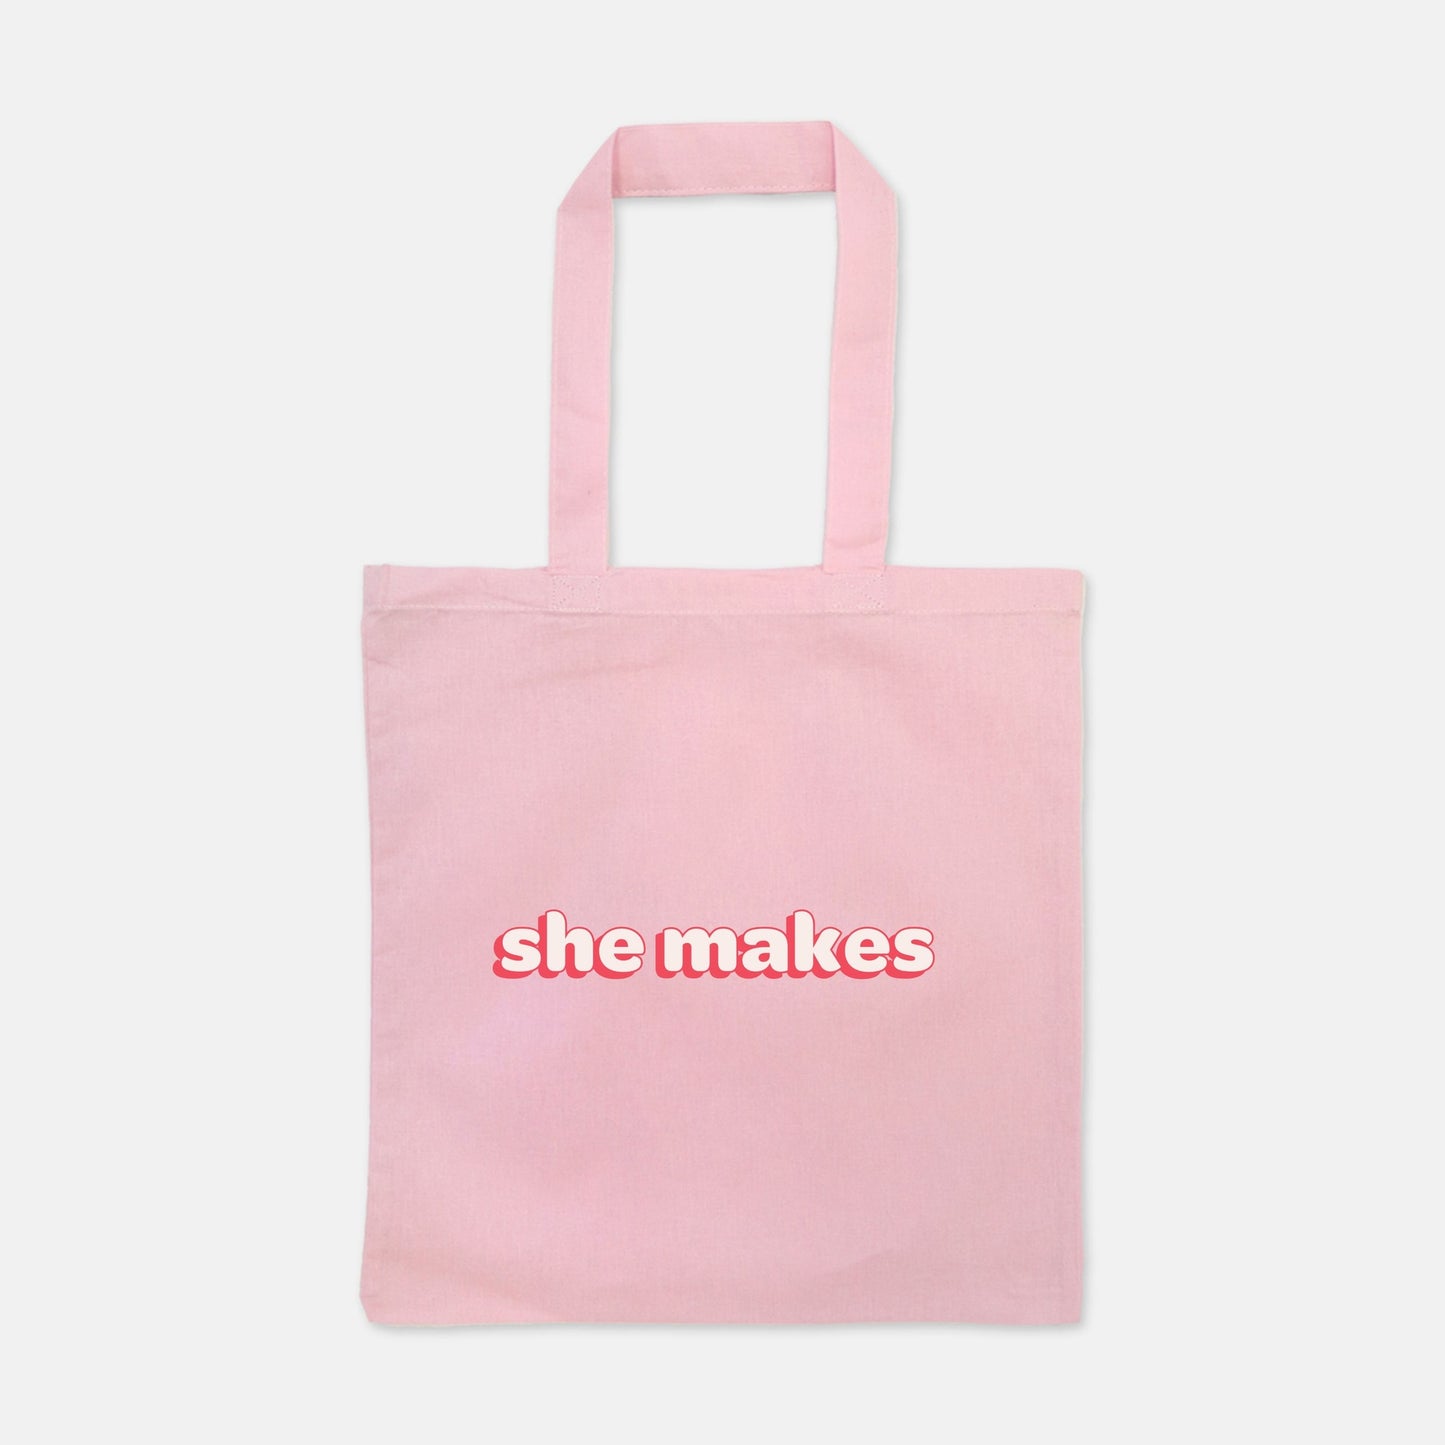 She Makes Tote Bag (Lightweight)